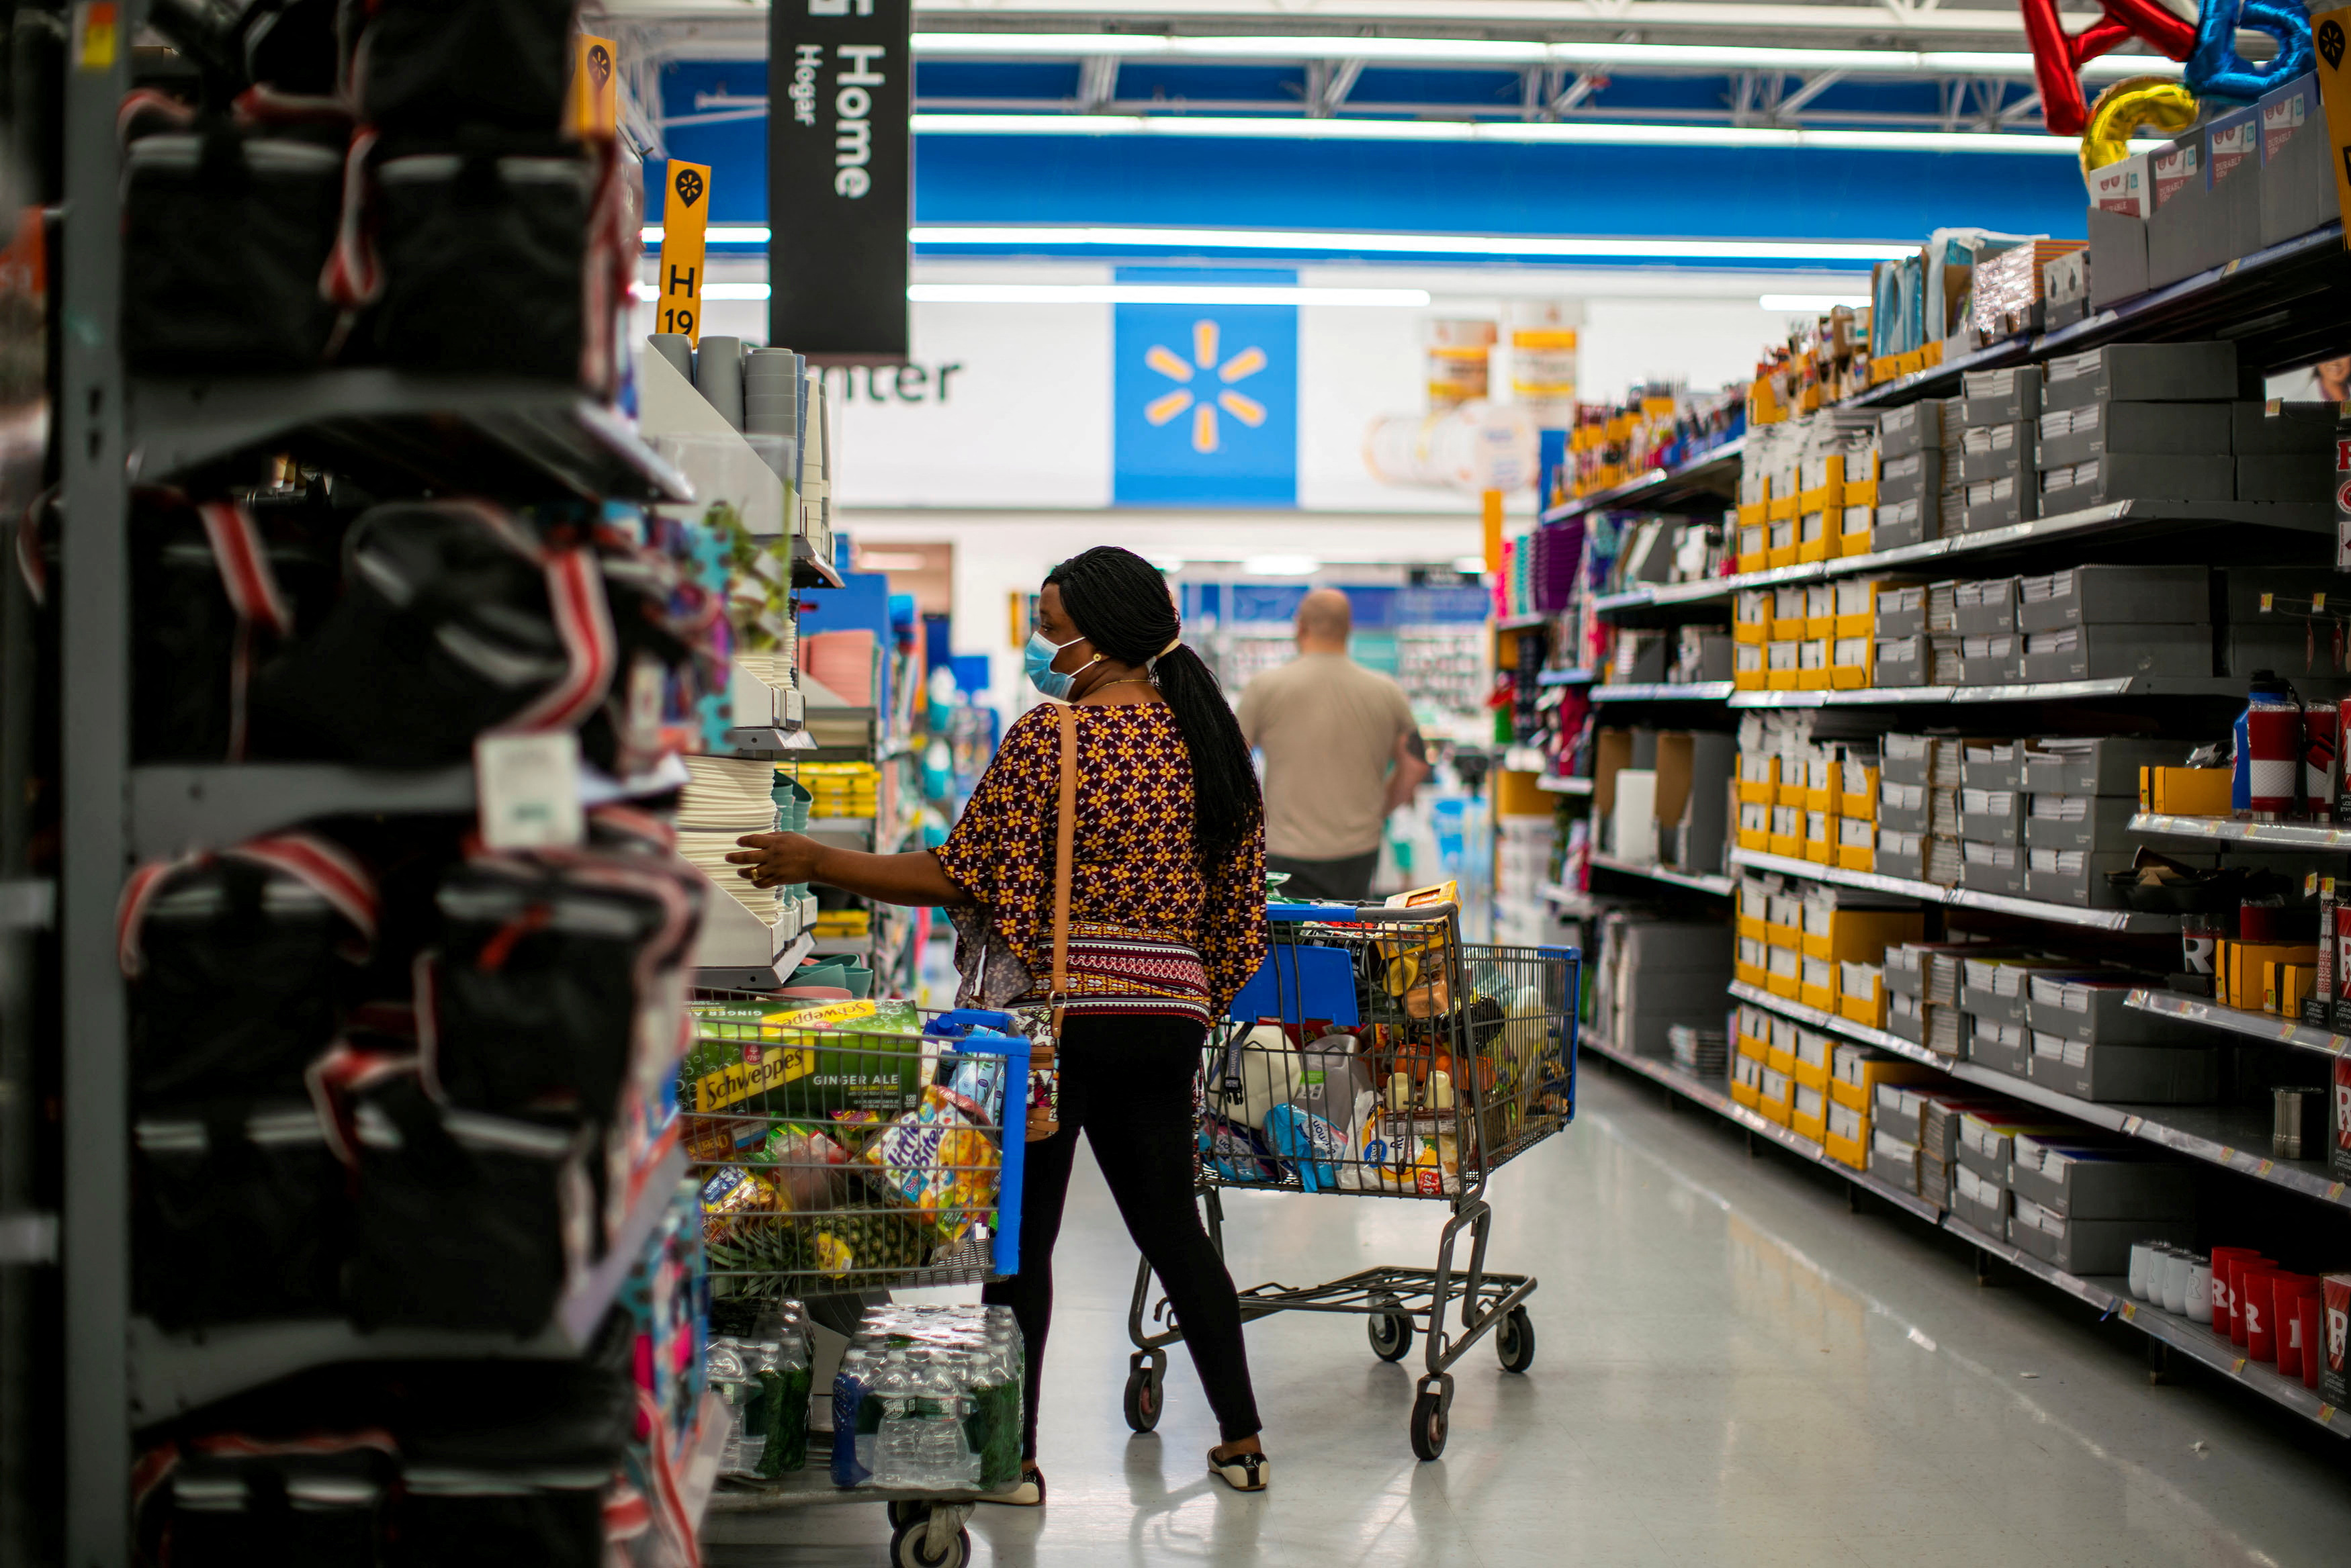 Walmart keeps grocery prices steady amid inflation, antitrust